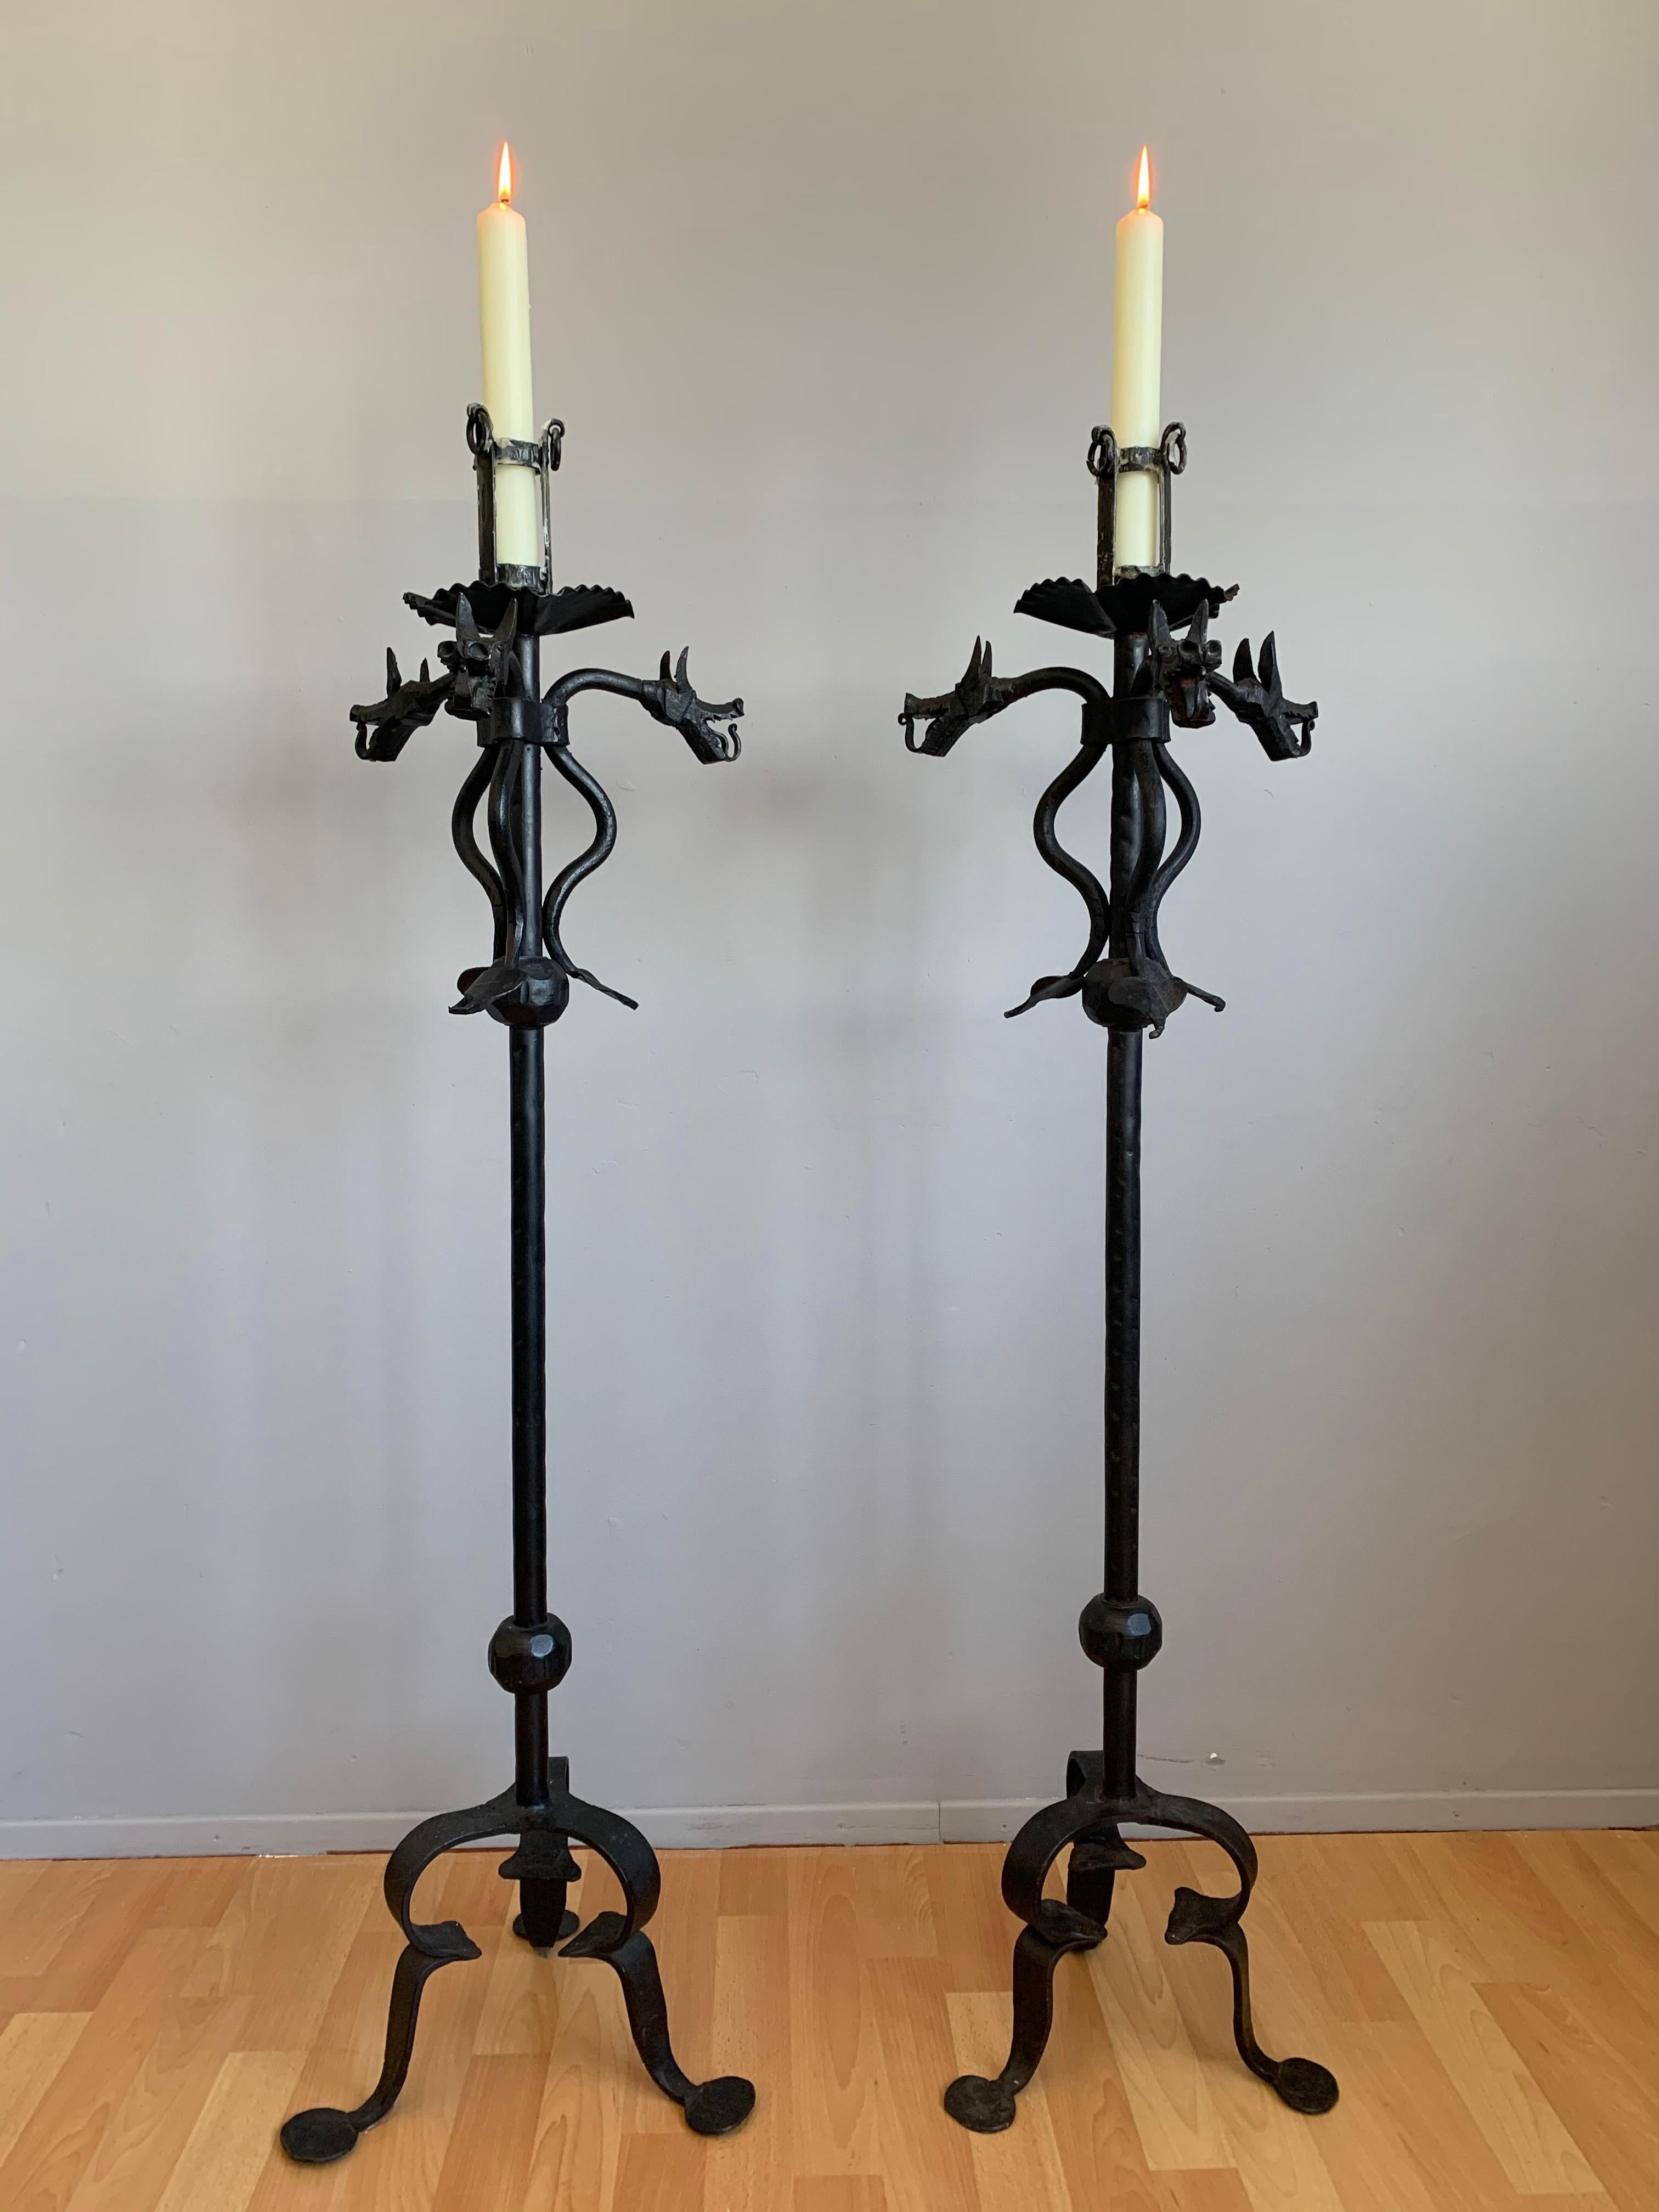 Gothic Revival pair of sculptural and highly decorative, wrought iron candle holders.

If you appreciate decorative antiques in general and you are looking for a pair of floor candlesticks in particular then this rare and all hand-crafted pair in